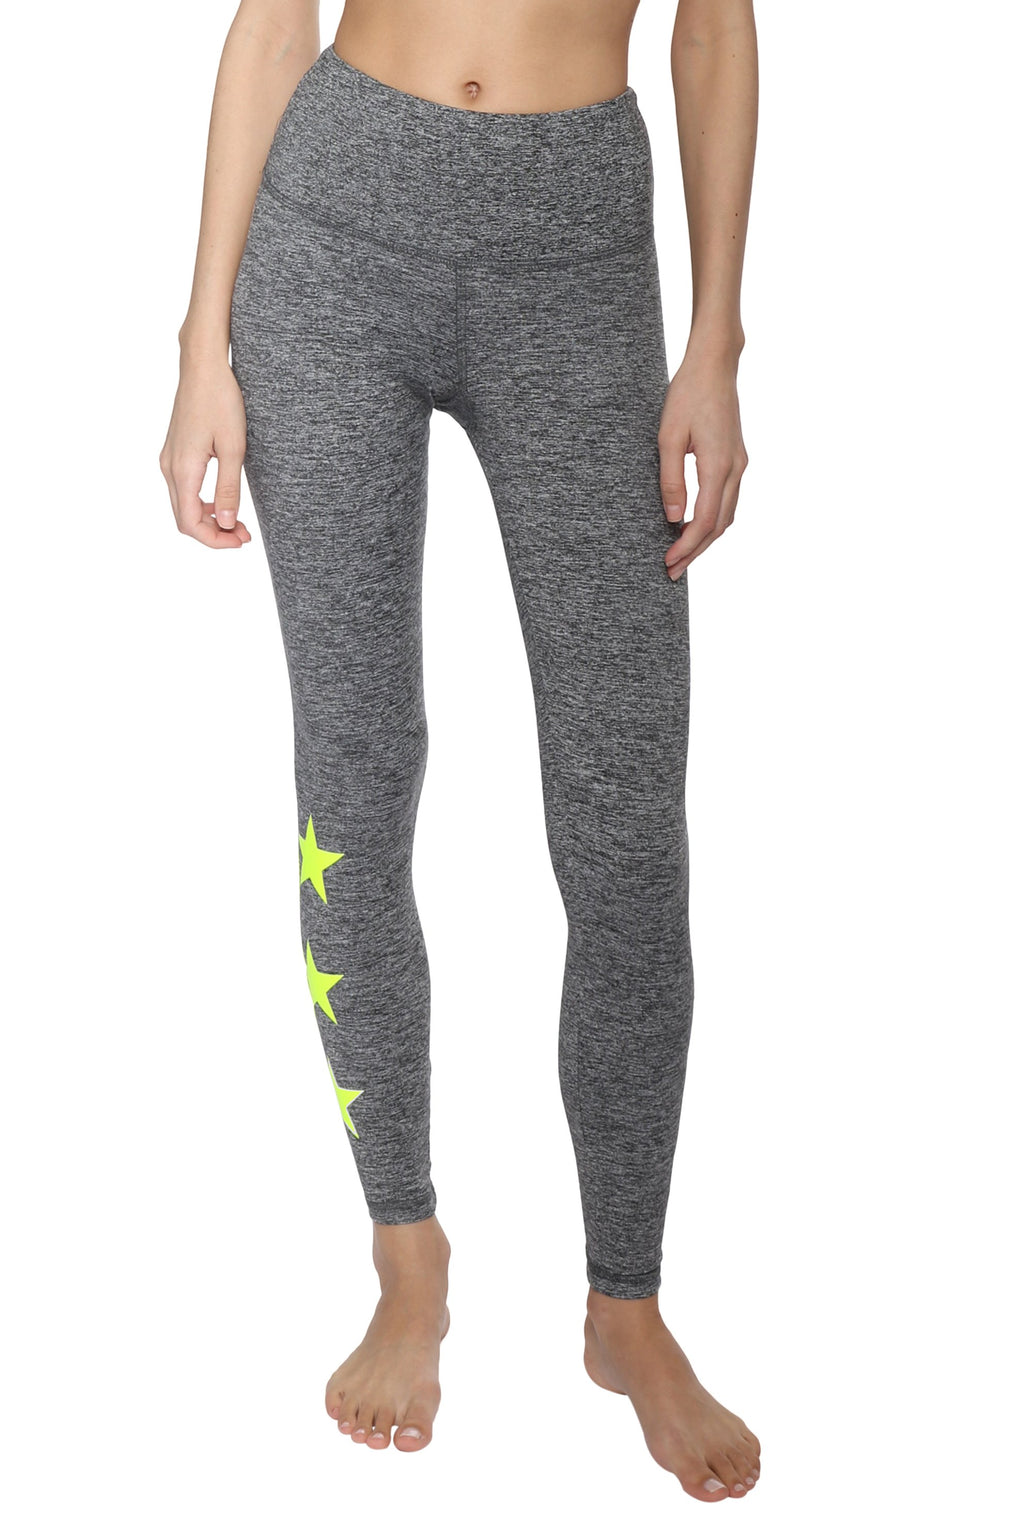 Strut This Star Ankle Leggings Moss/Neon Yellow